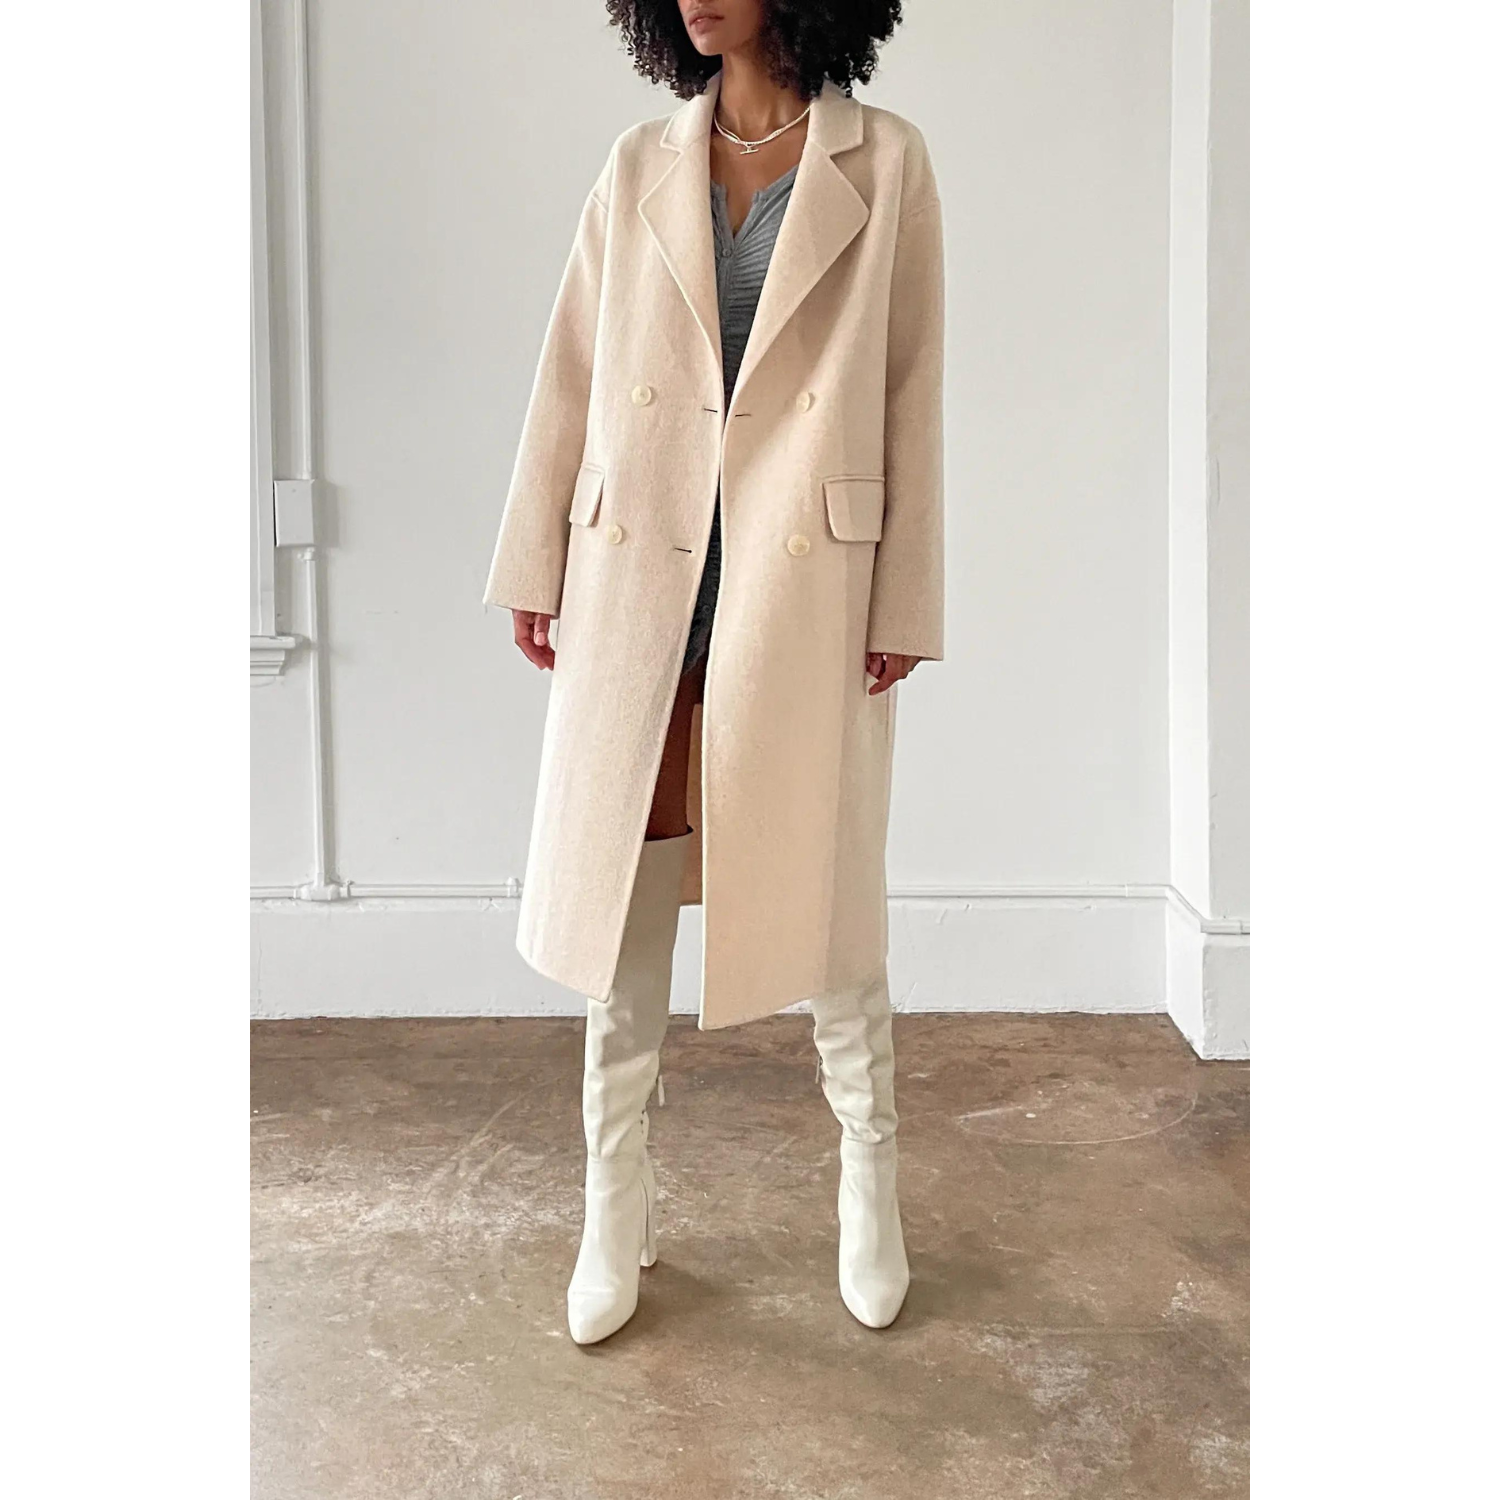 5 Classic Jackets & Coats for Fall 2022 — Lily Chérie